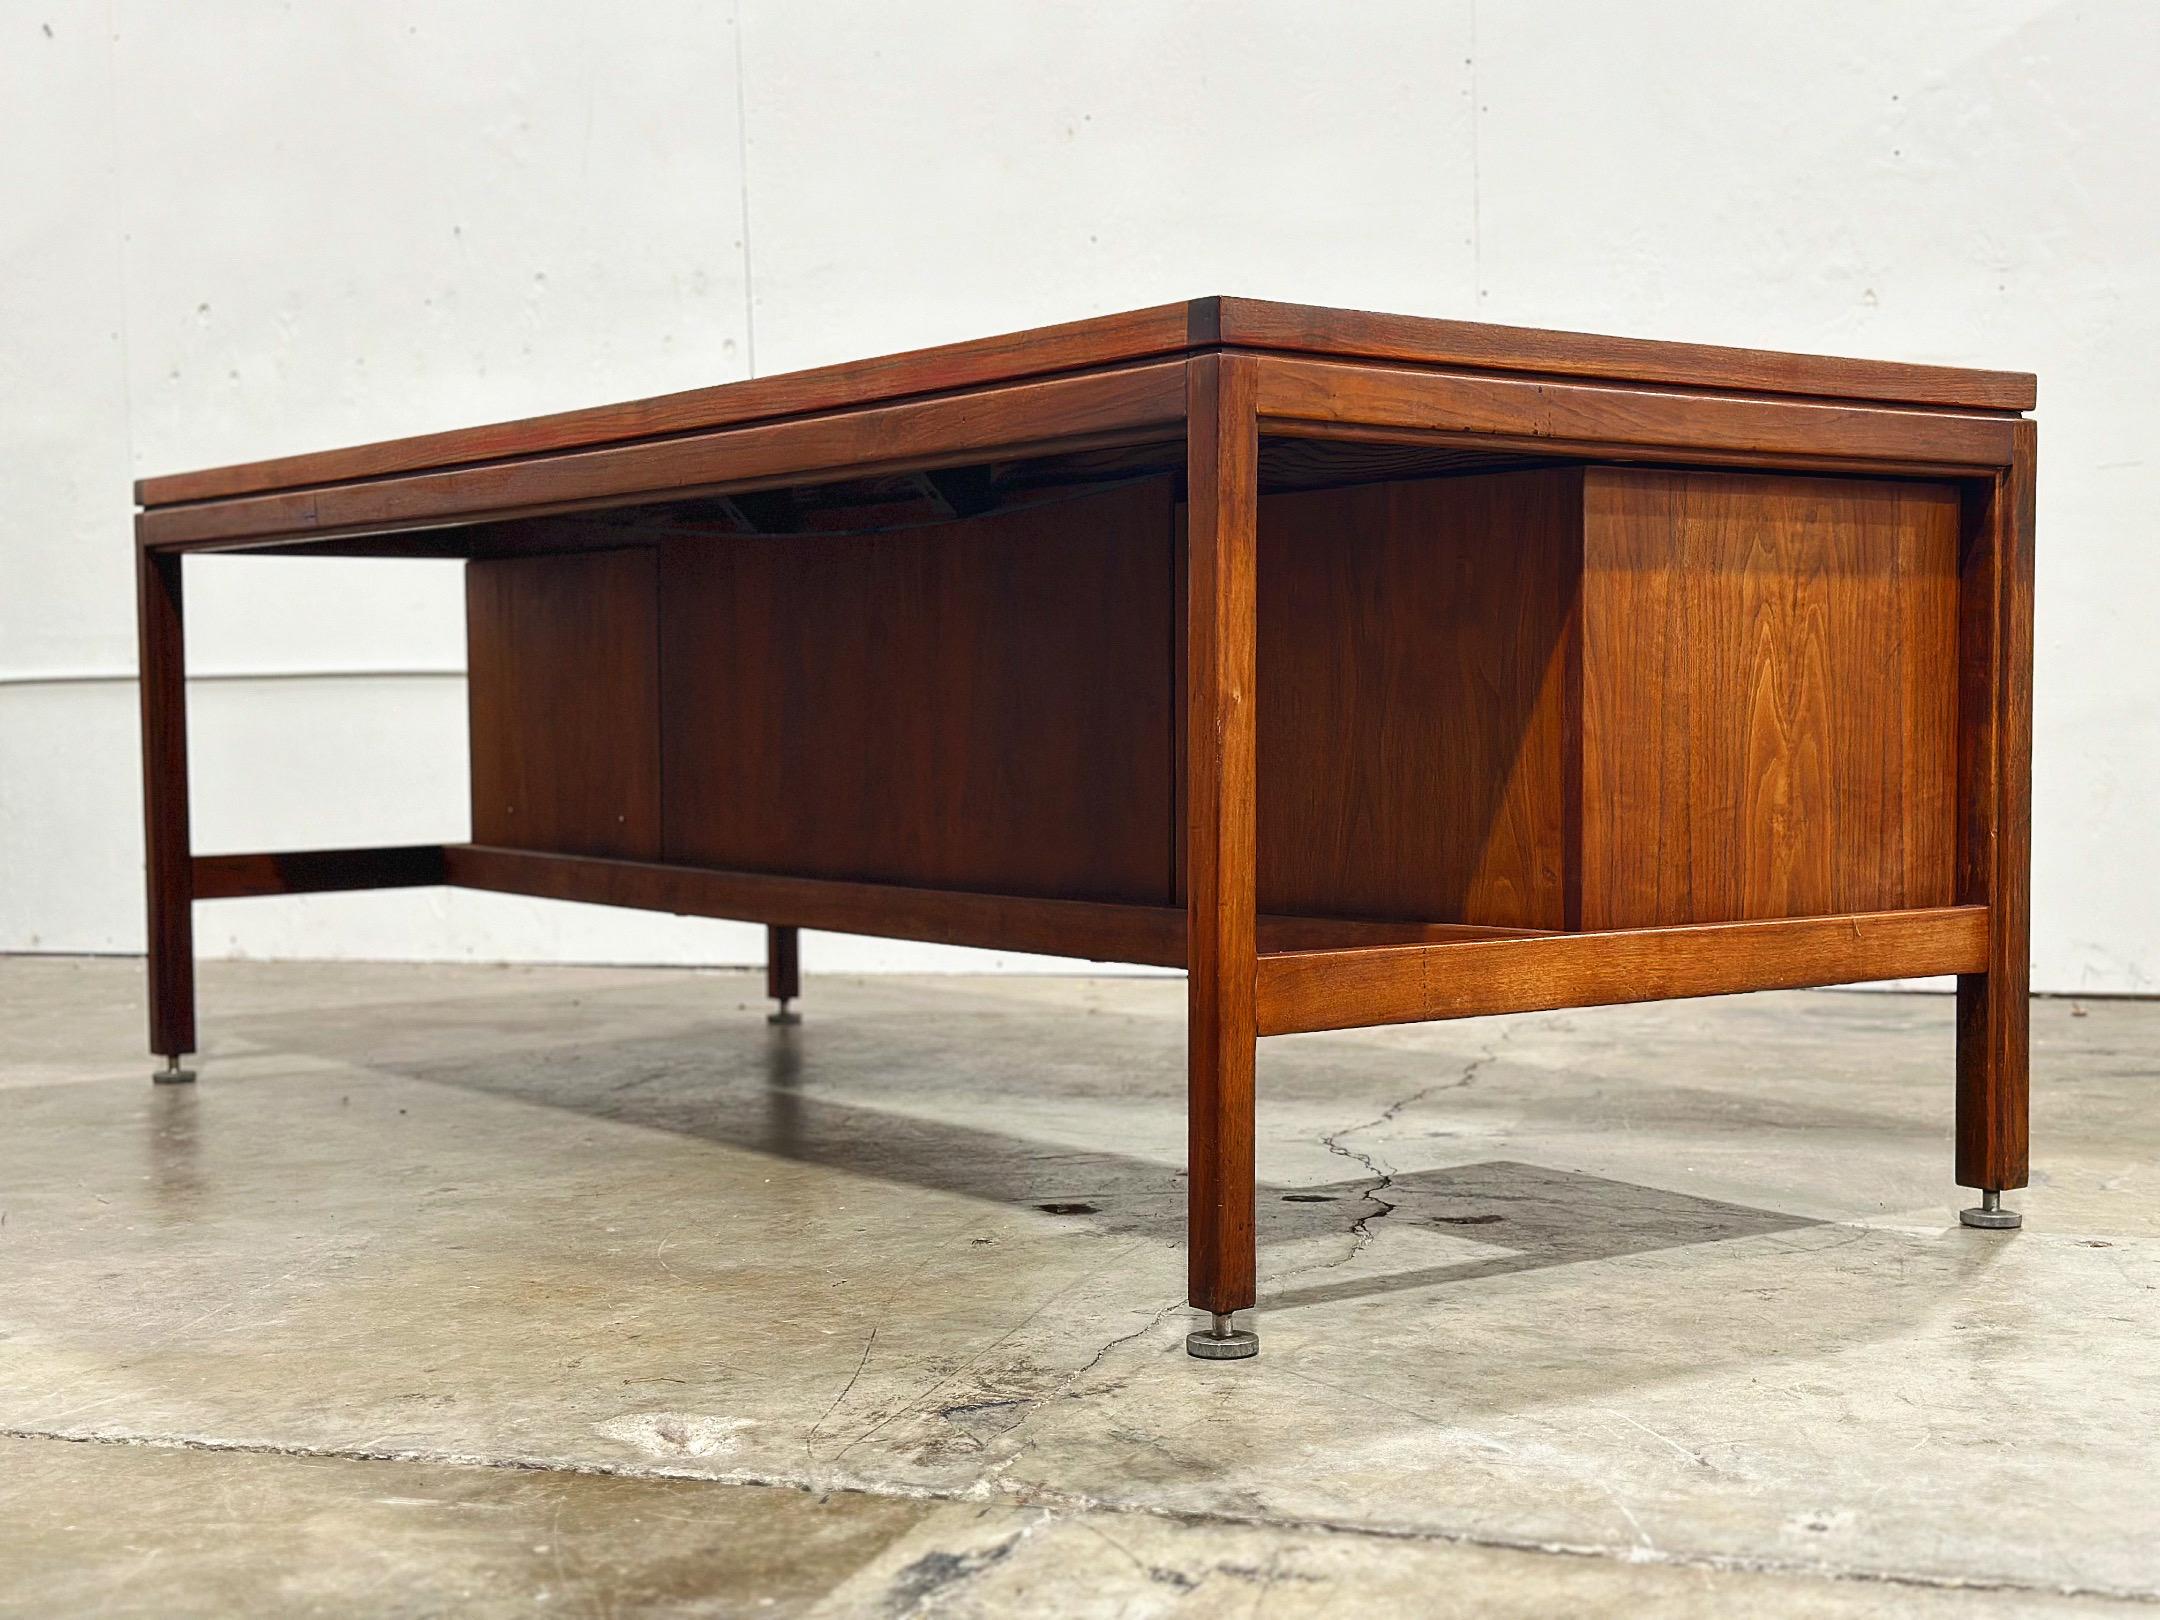 Vintage mid century modern executive desk by Jens Risom, circa 1960s. Manufactured by his firm, Jens Risom Design and produced during the late 1960s / early 1970s. Features five drawers, tow, pull out writing/typing surfaces, solid aluminum